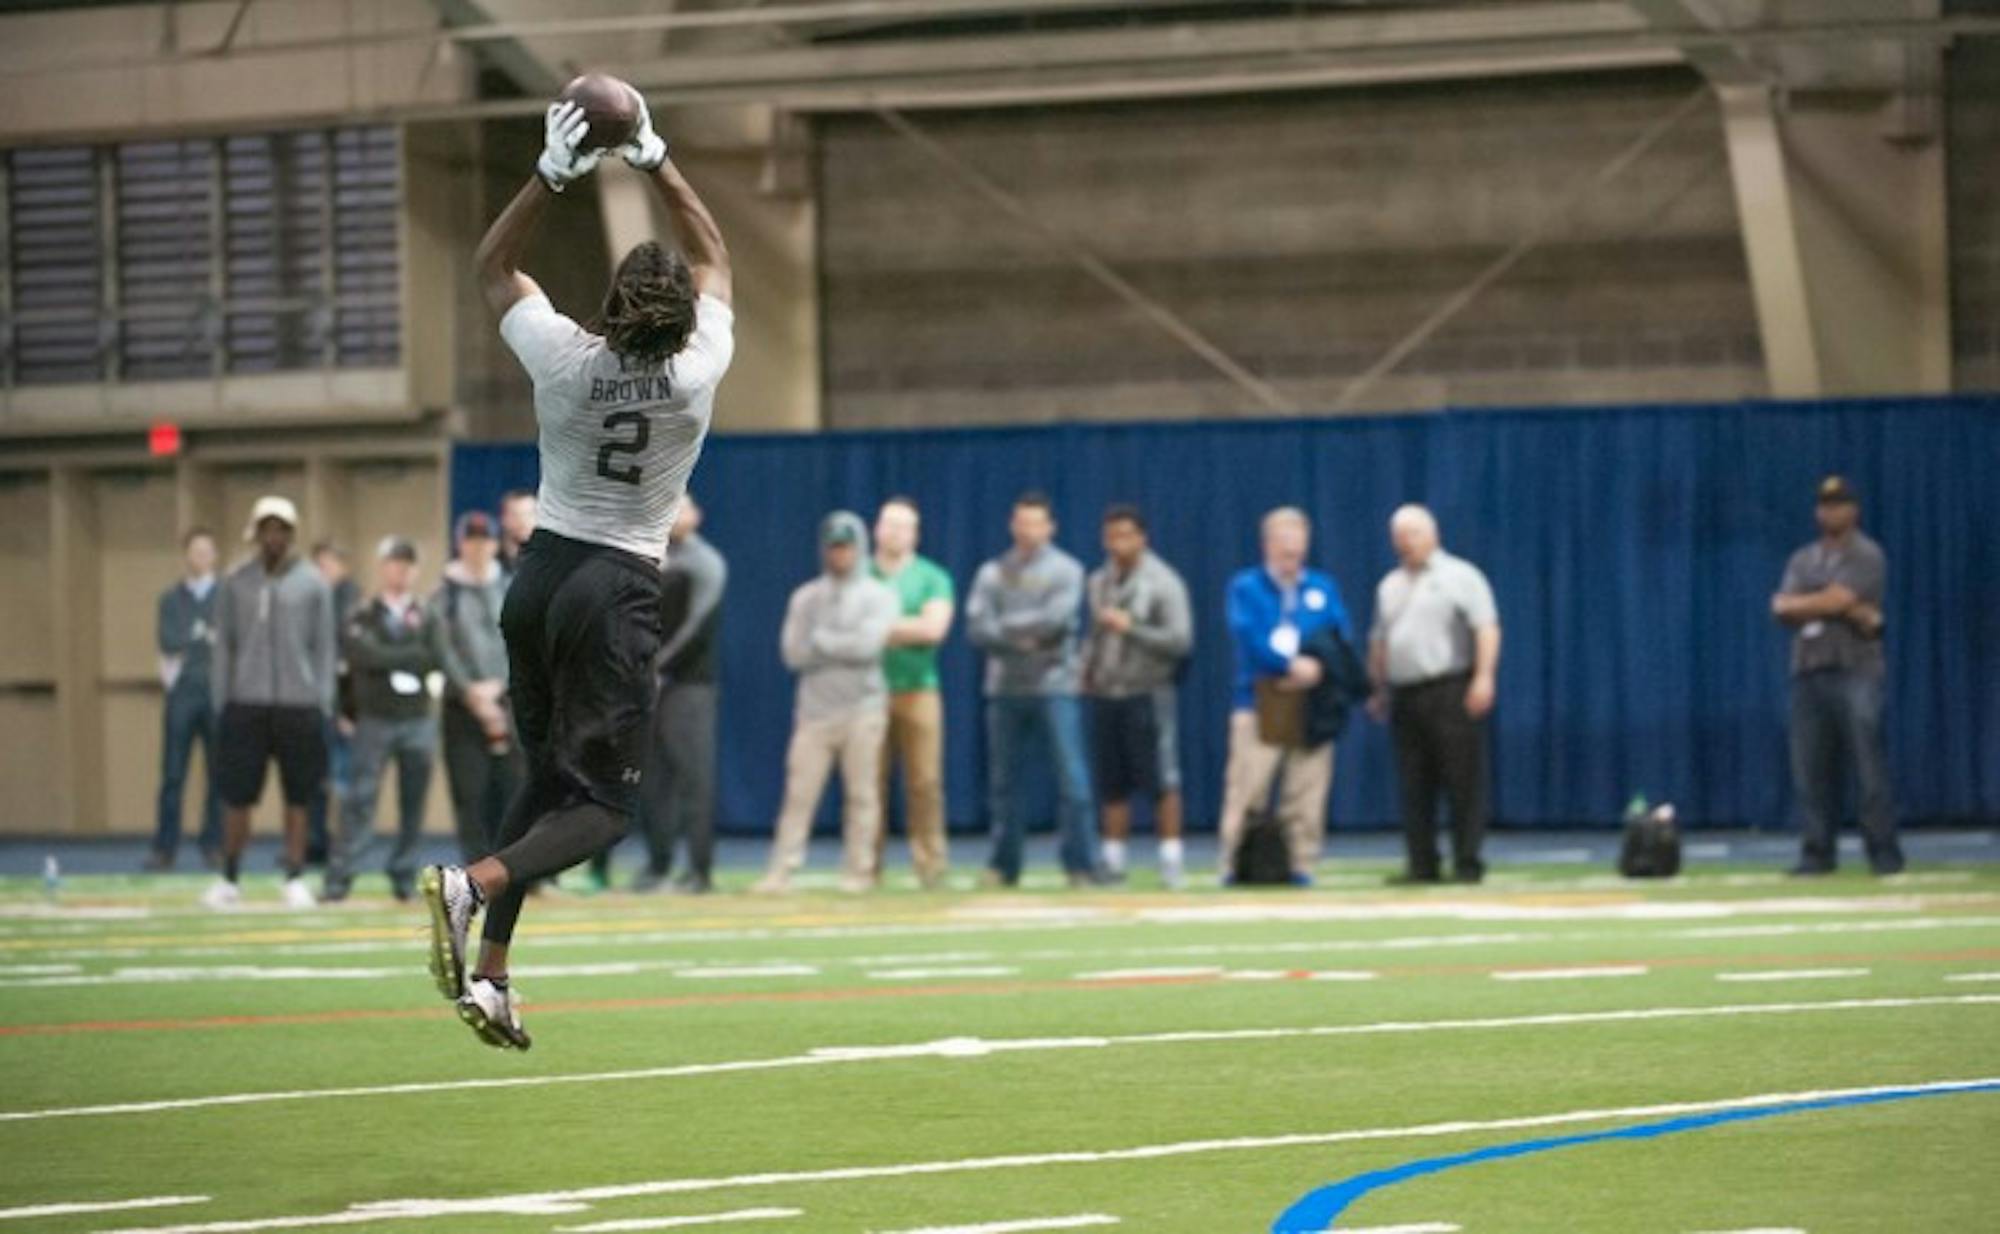 Former Irish receiver Chris Brown leaps to make a catch during Notre Dame’s Pro Day on Thursday at Loftus Sports Complex.